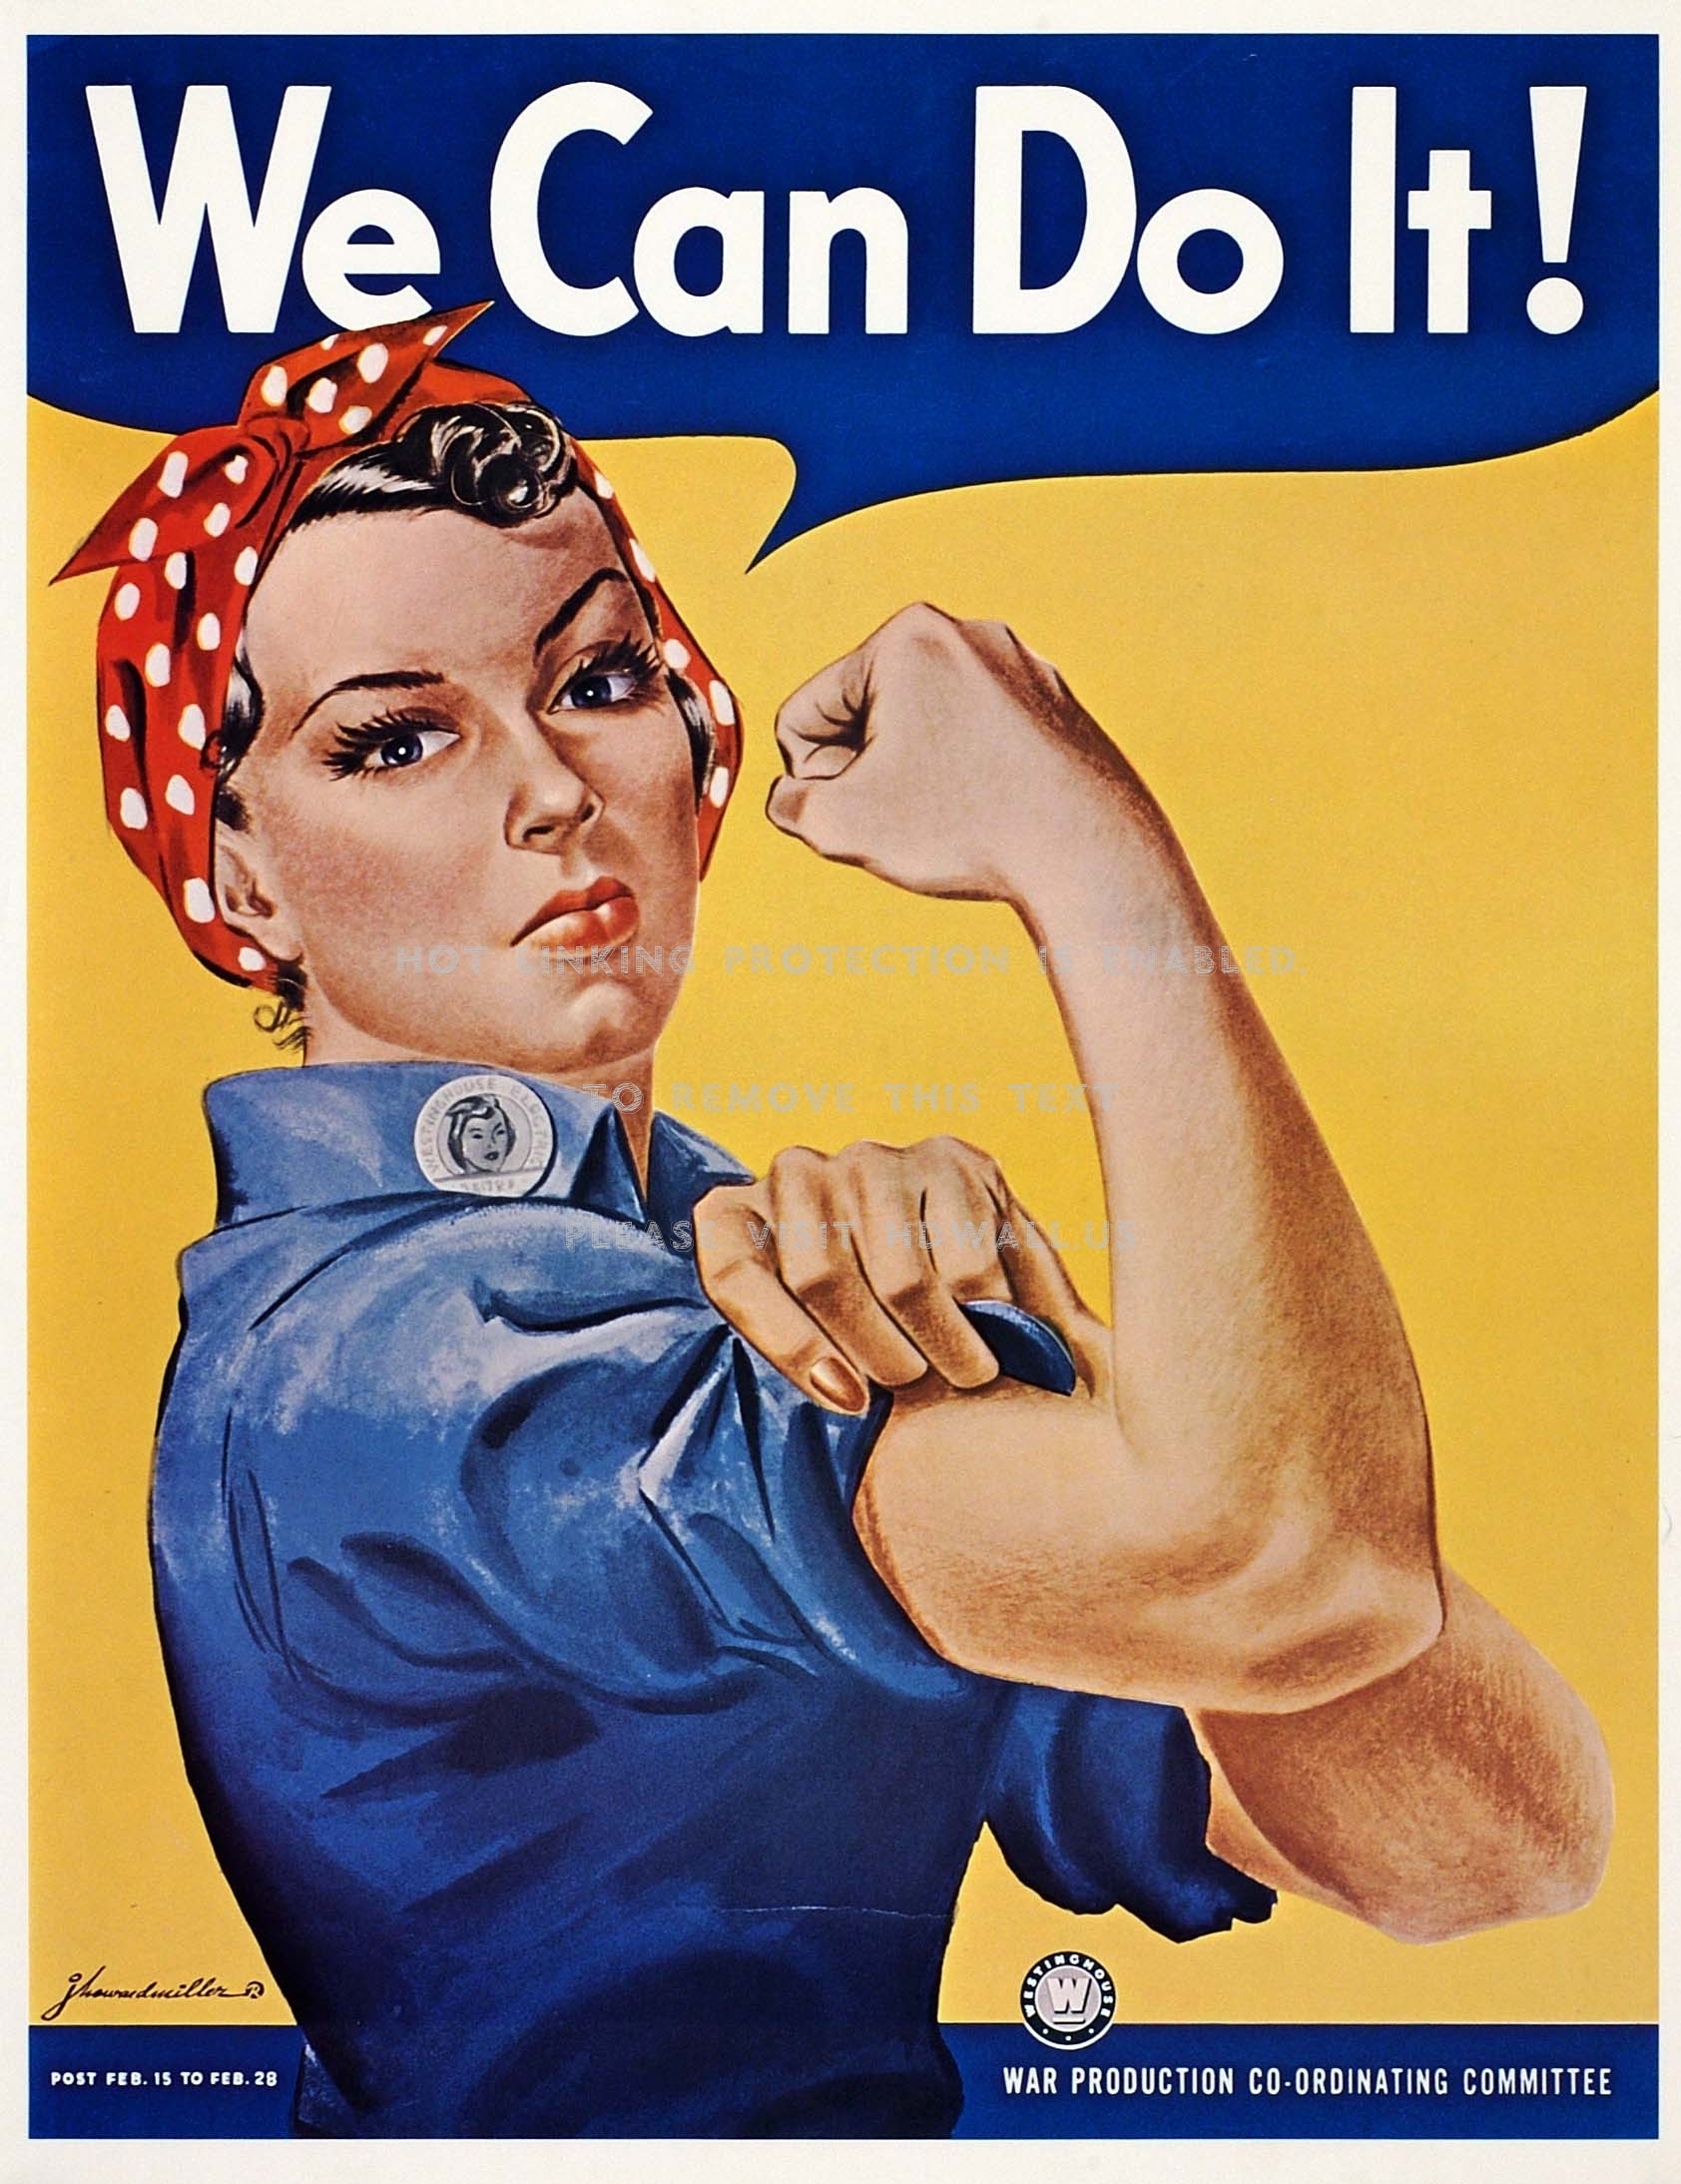 we can do it wallpaper,poster,magazine,vintage advertisement,thumb